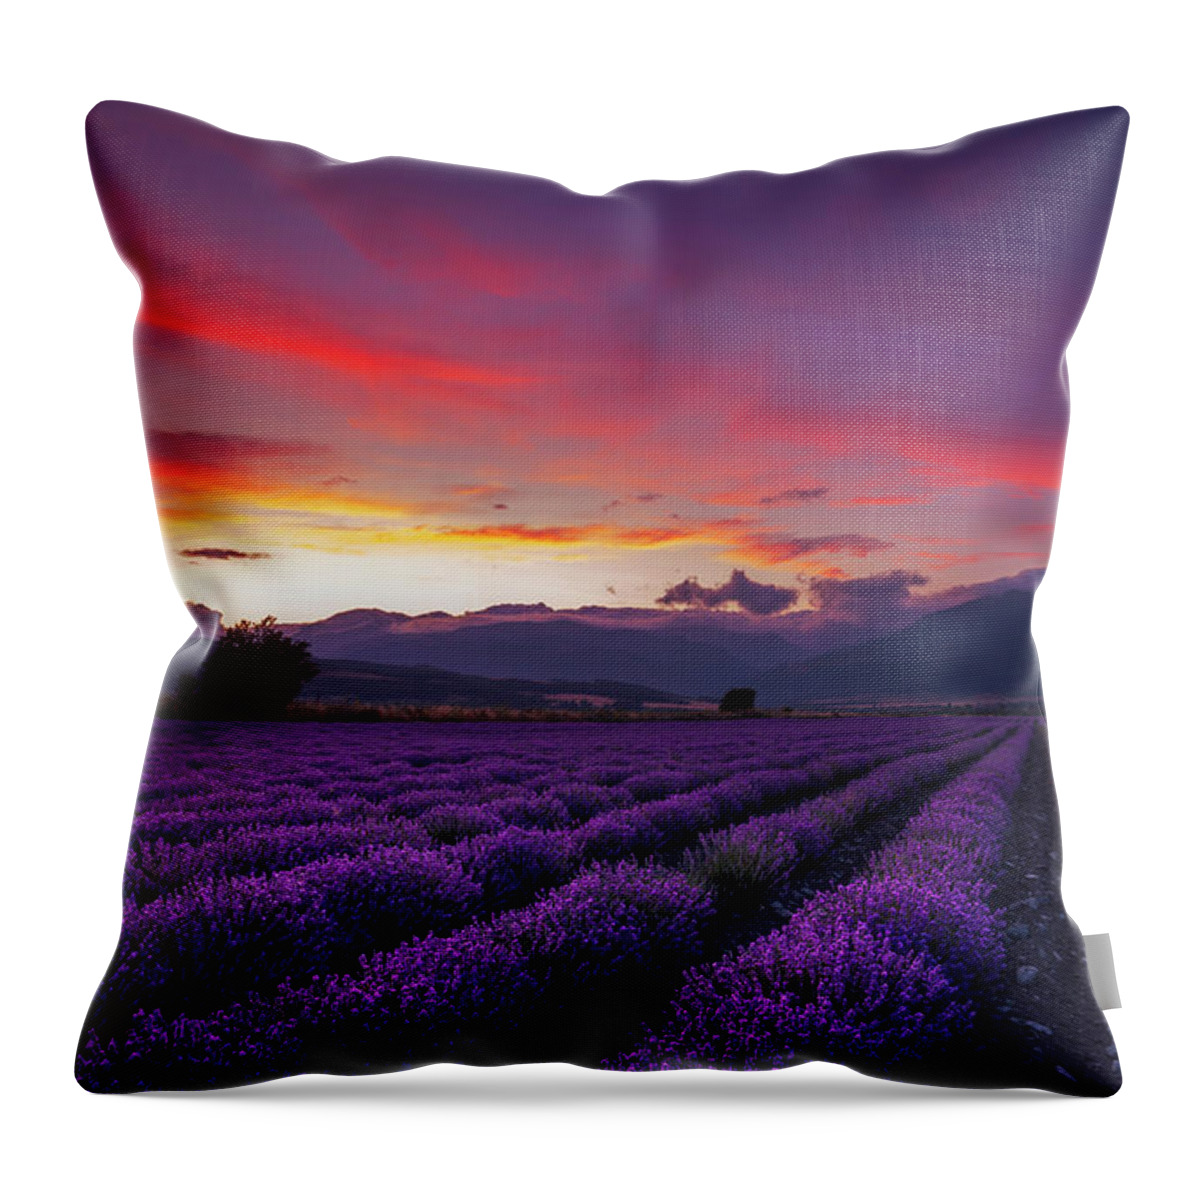 Dusk Throw Pillow featuring the photograph Lavender Season by Evgeni Dinev